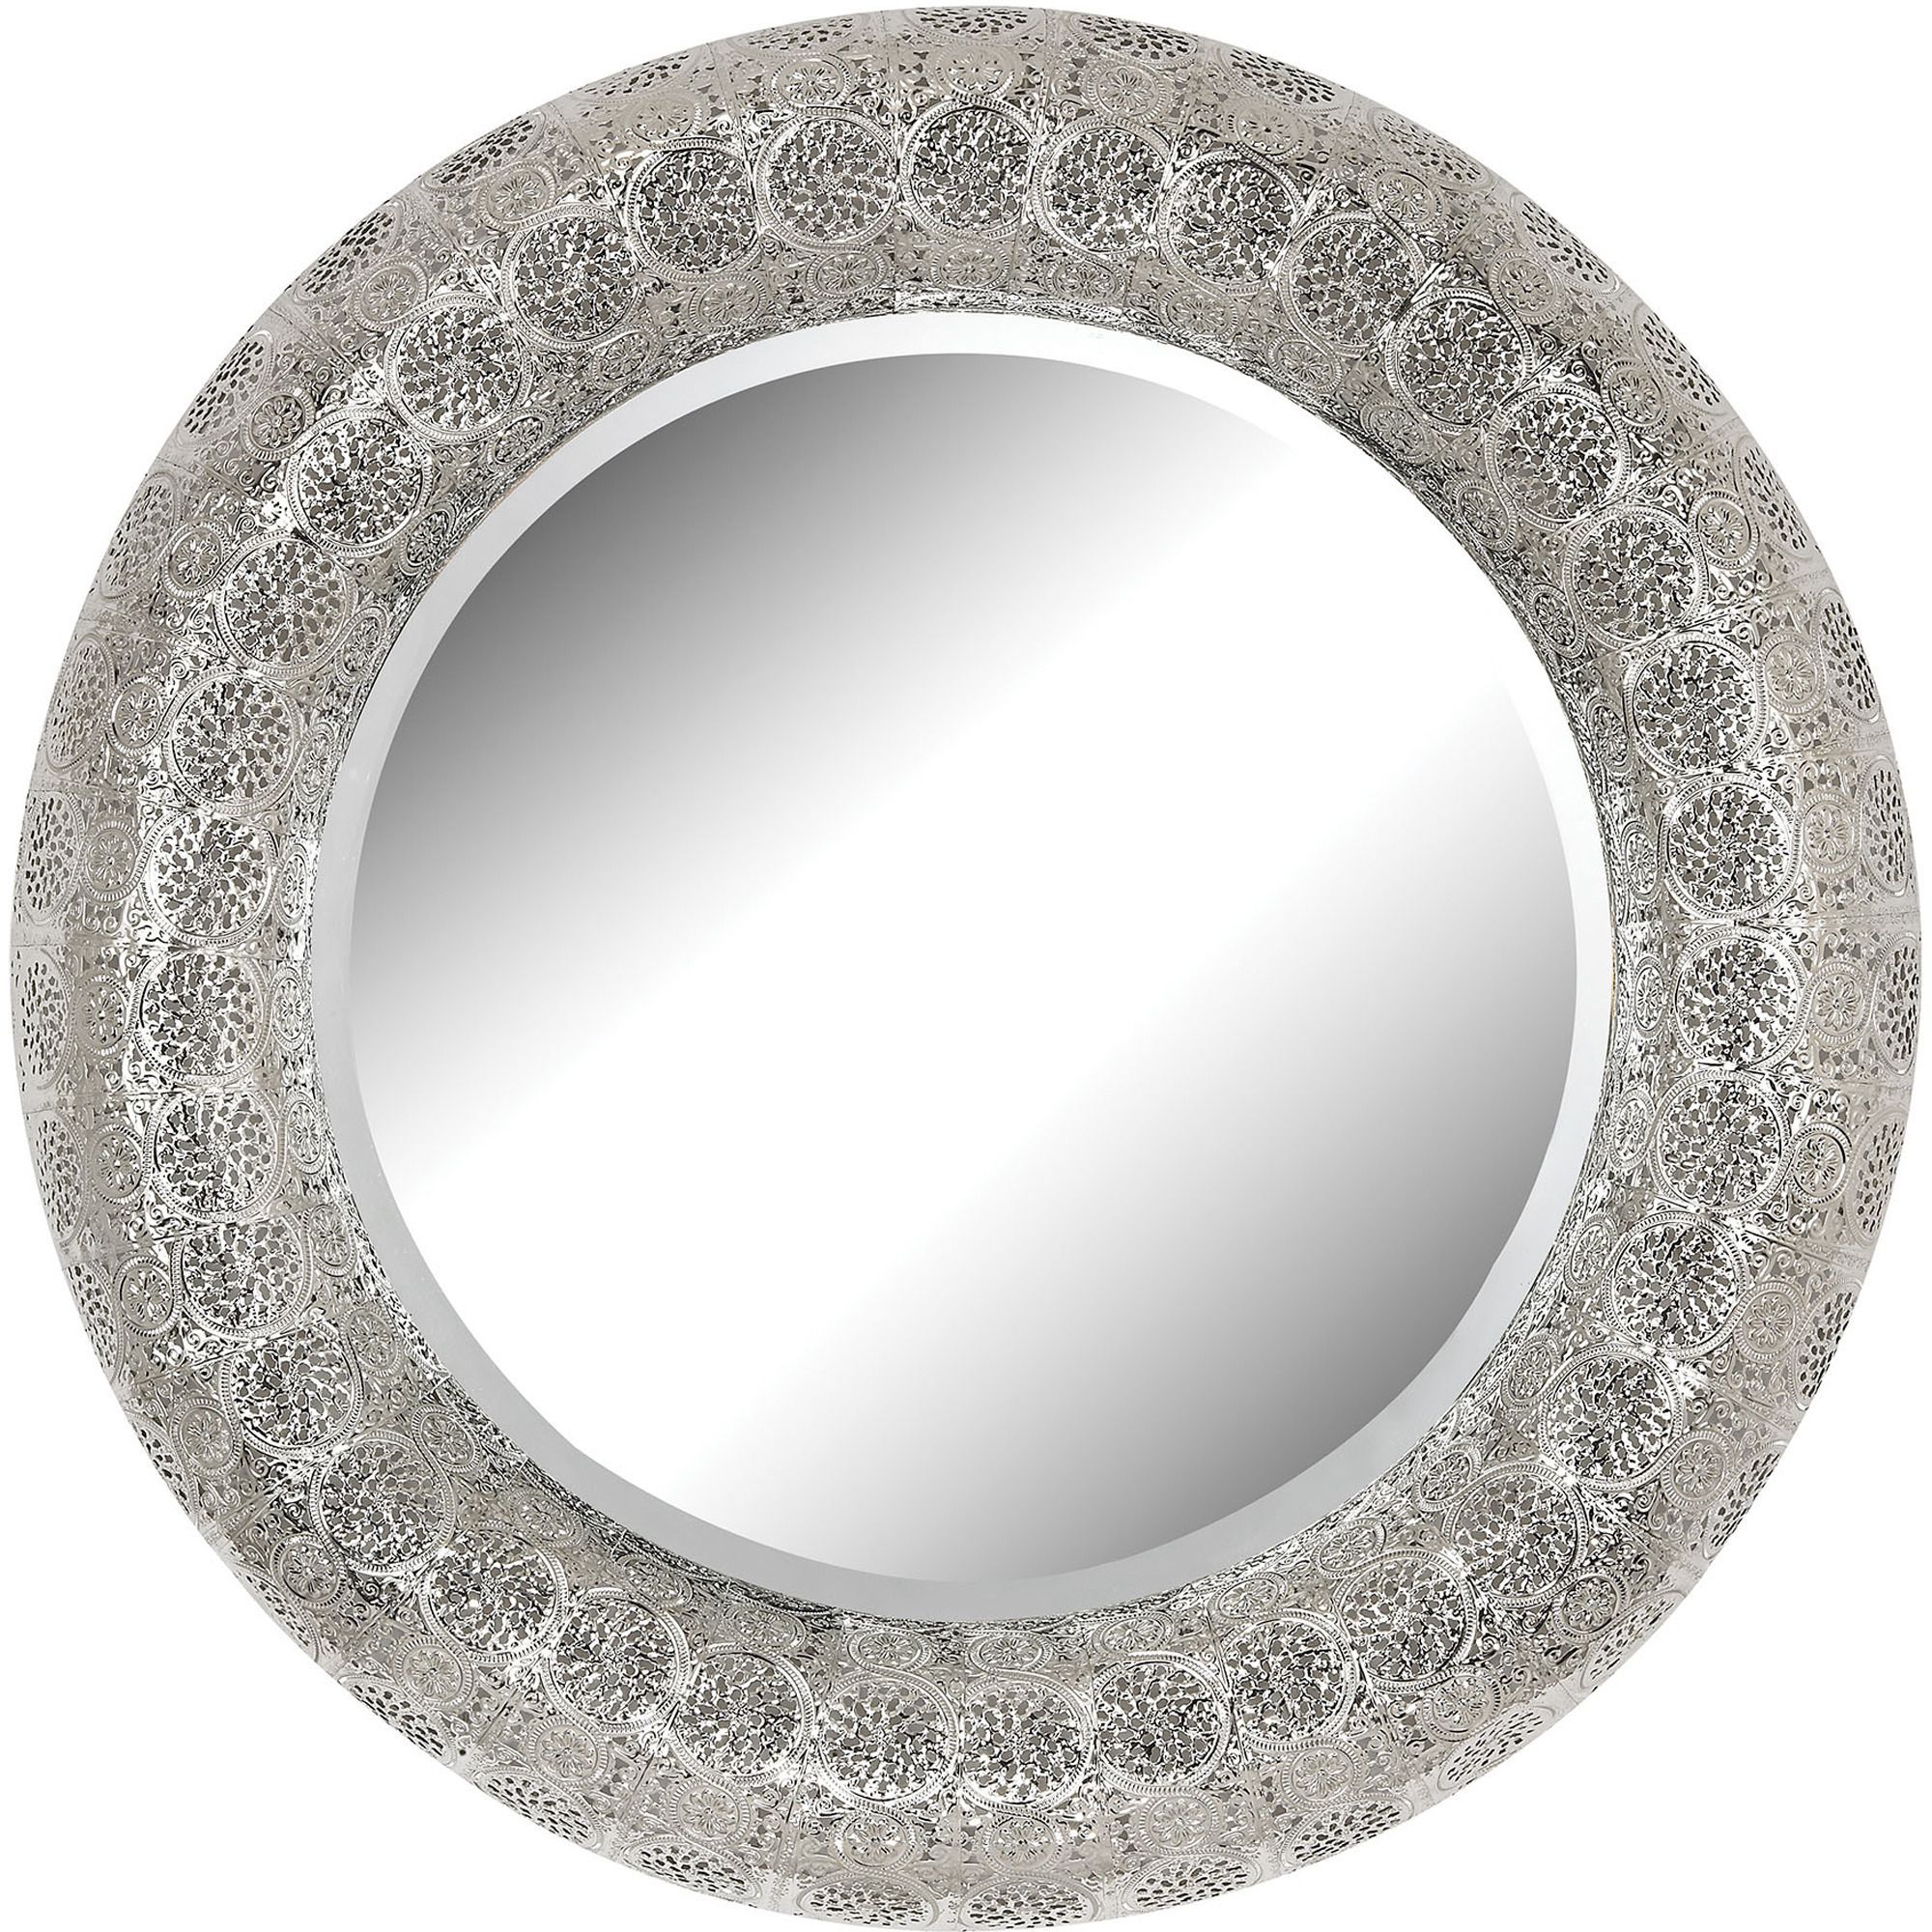 Embossed Metal Frame Mirror In Silver | Sterling | Home Gallery Stores In Metallic Silver Framed Wall Mirrors (View 11 of 15)